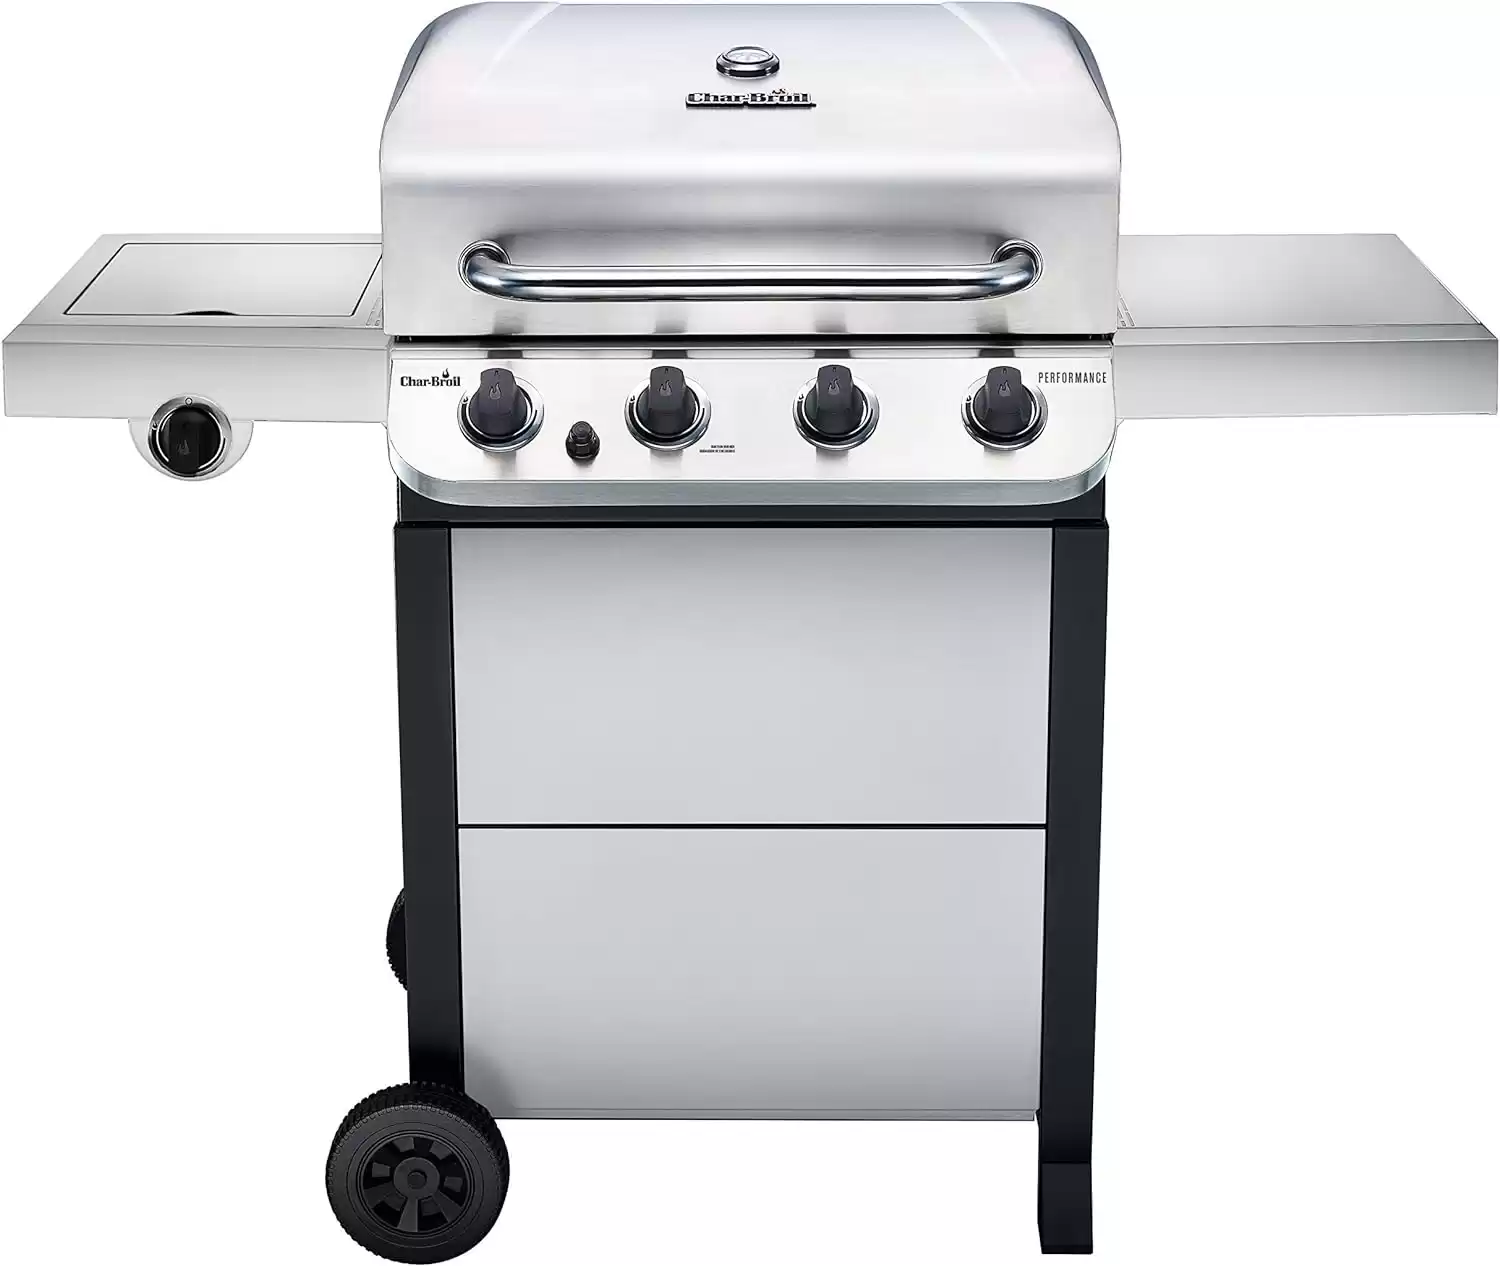 Char-Broil Performance Series Convective 4-Burner Propane Gas Grill